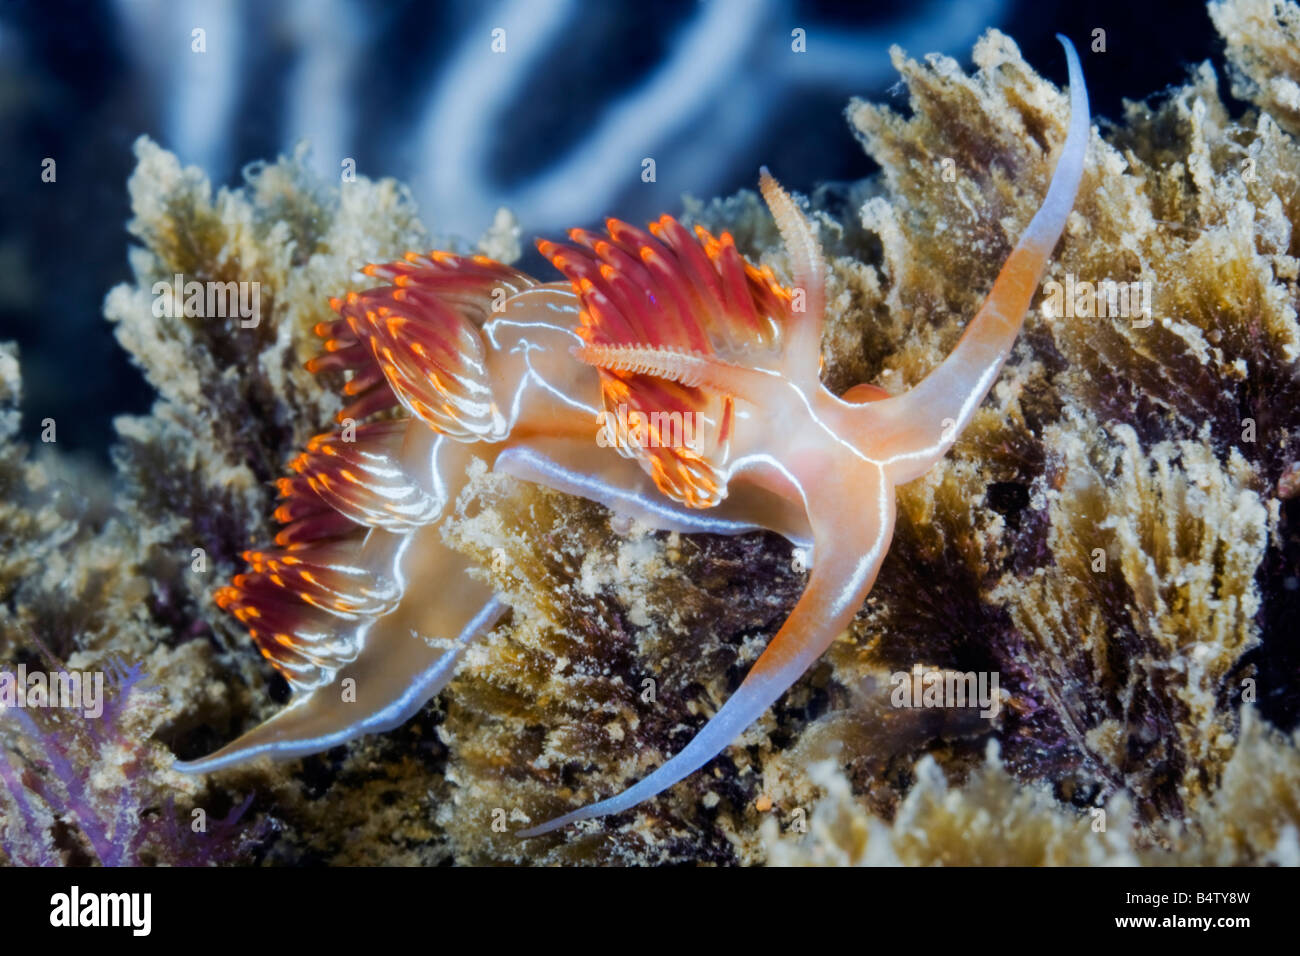 A red, yellow and blue coloured nudibranch or sea slug makes its way across a reef in the Portugese Algarve sea. Stock Photo